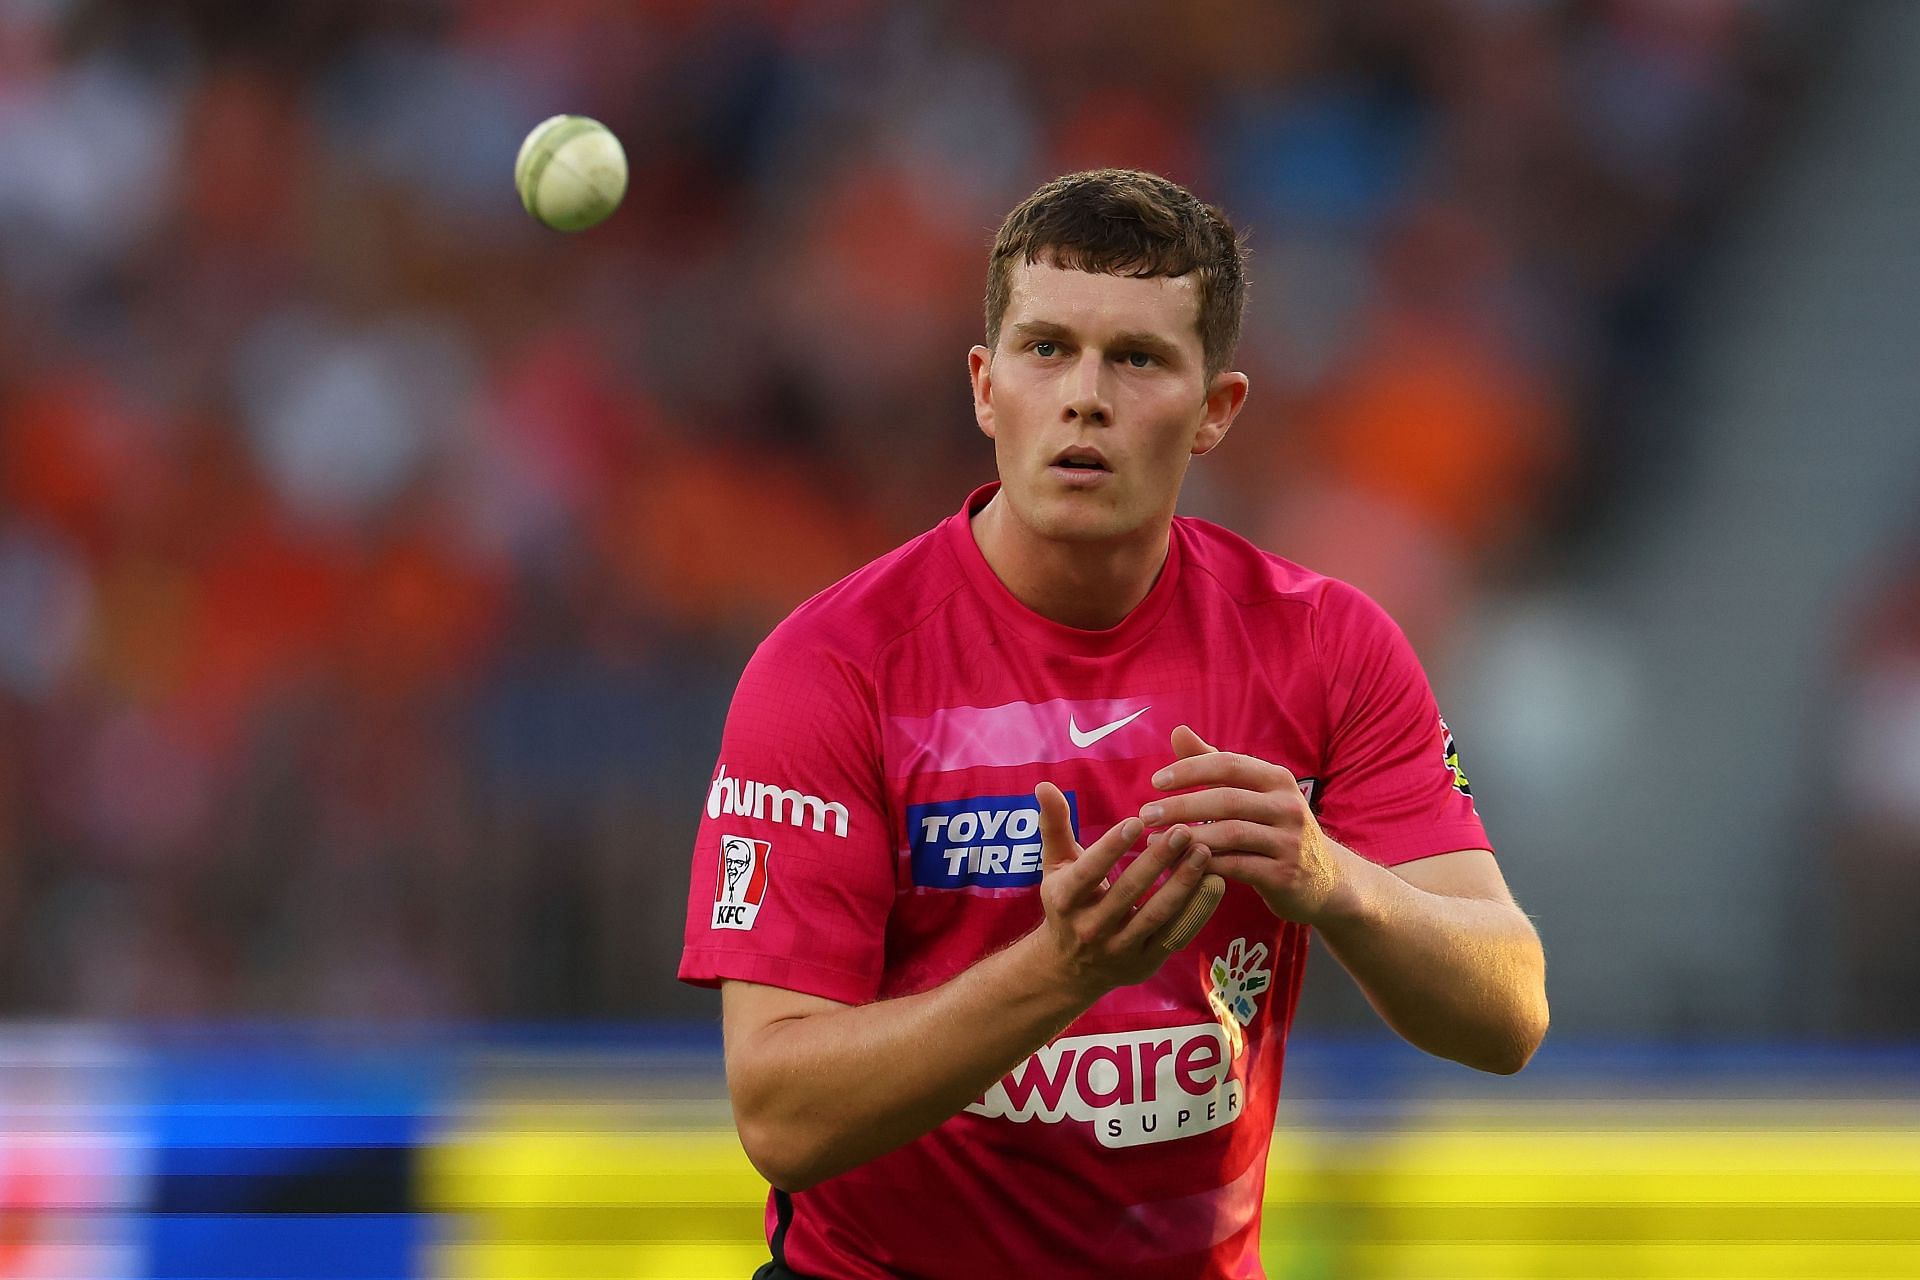 BBL - The Qualifier: Perth Scorchers v Sydney Sixers